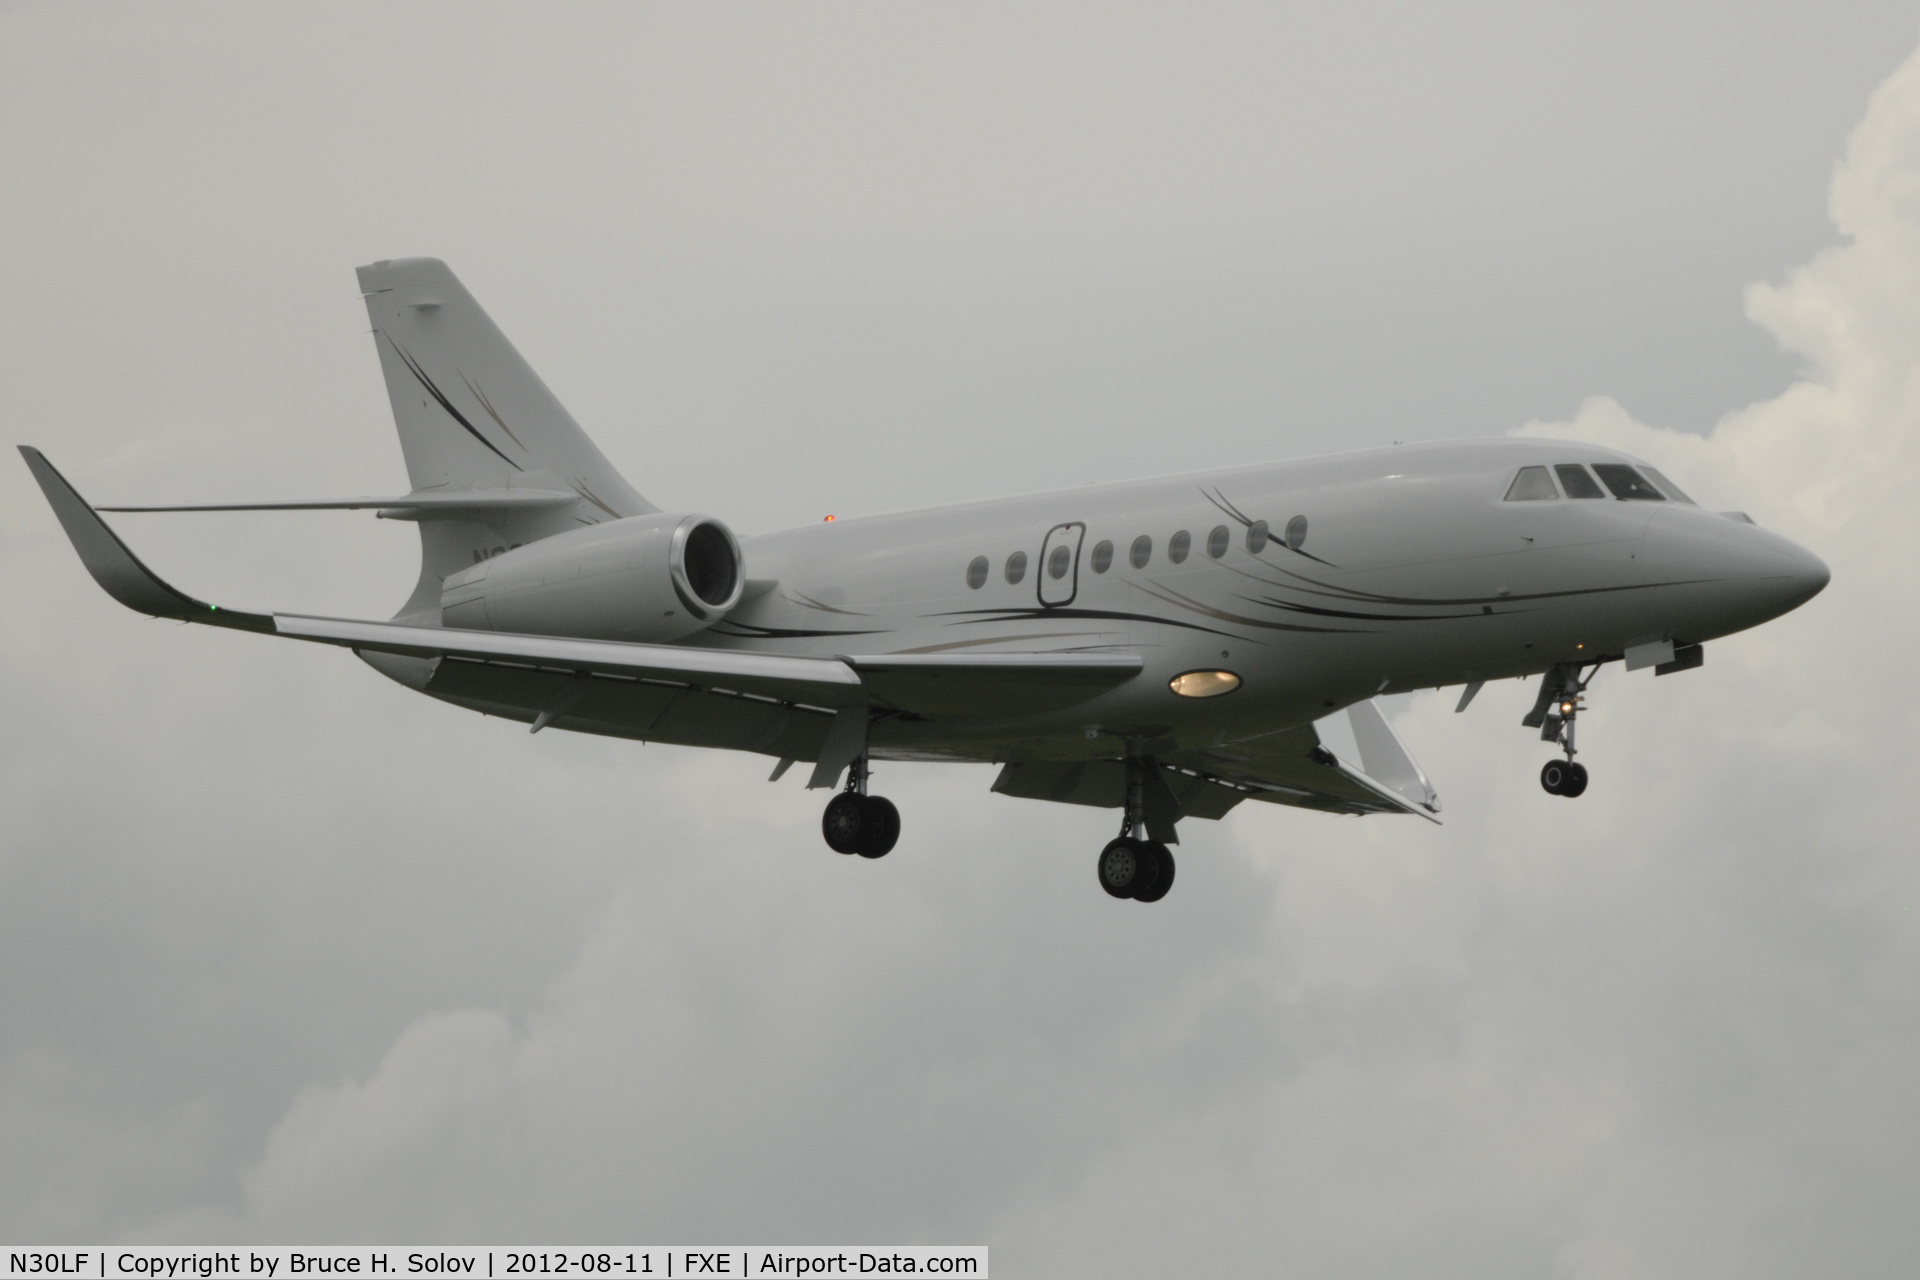 N30LF, 2007 Dassault Falcon 2000EX C/N 602, On approach to Runway 8 on an overcast day